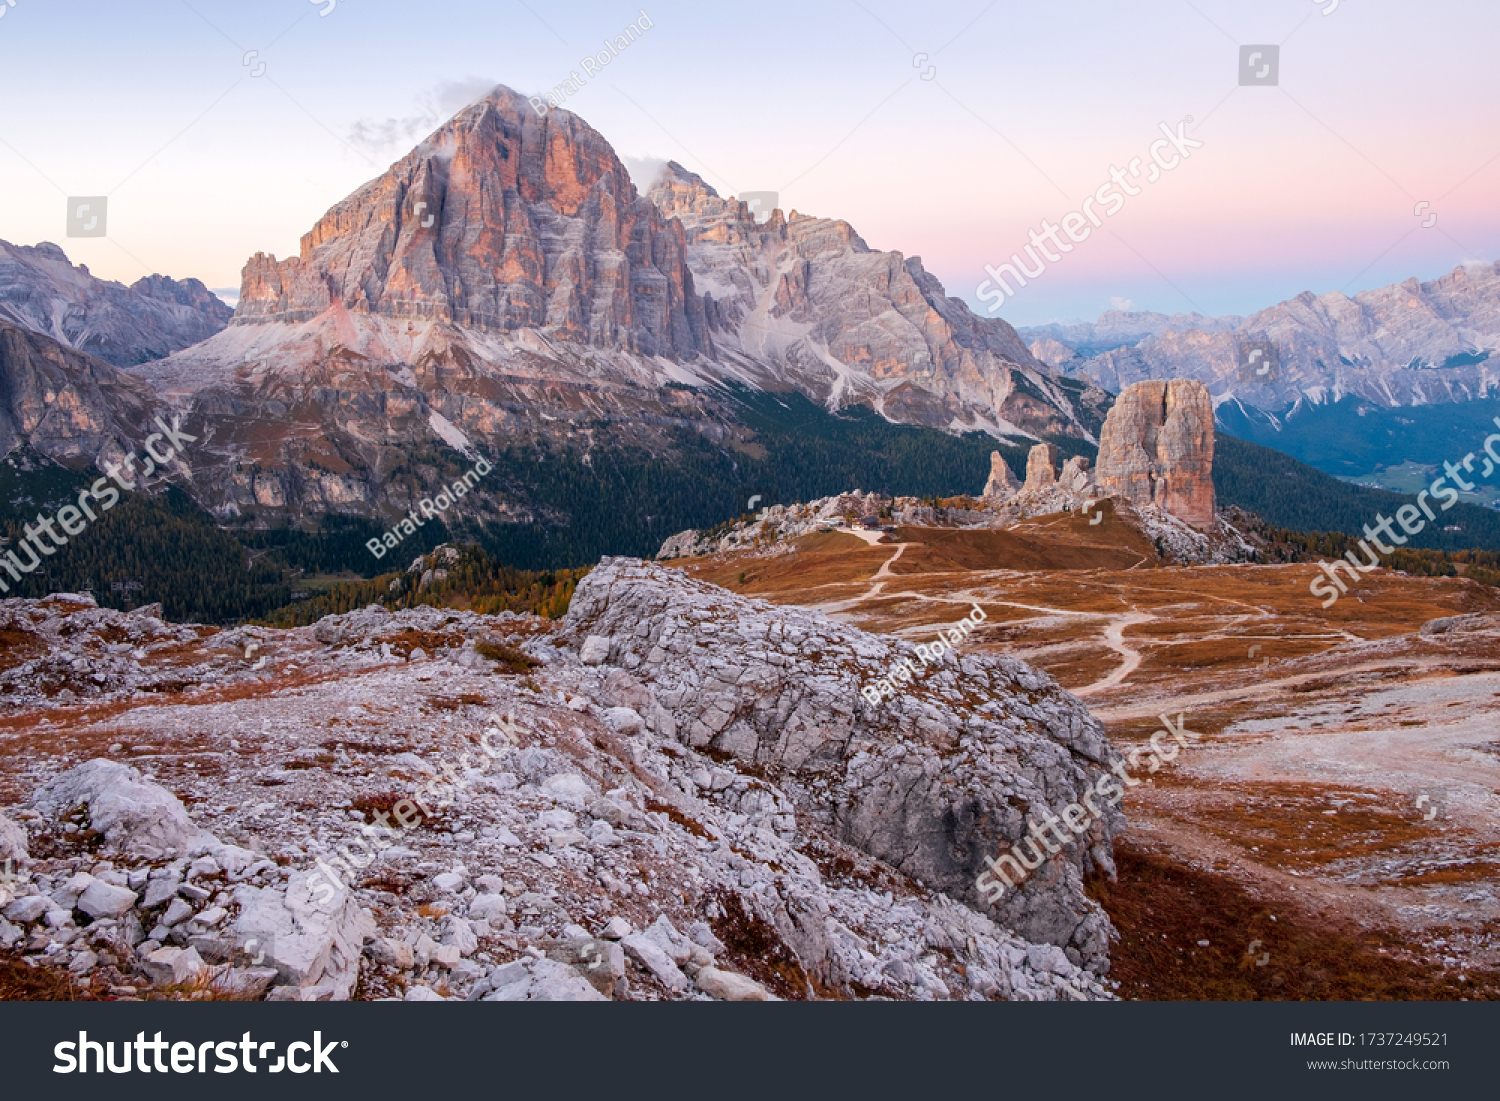 Next to the beautiful Cinque Torri mountains are the Tofana di rozes mountains, close to the town of Cortina d’Ampezzo, at the Falzarego pass in the province of Belluno in northern Italy #1737249521